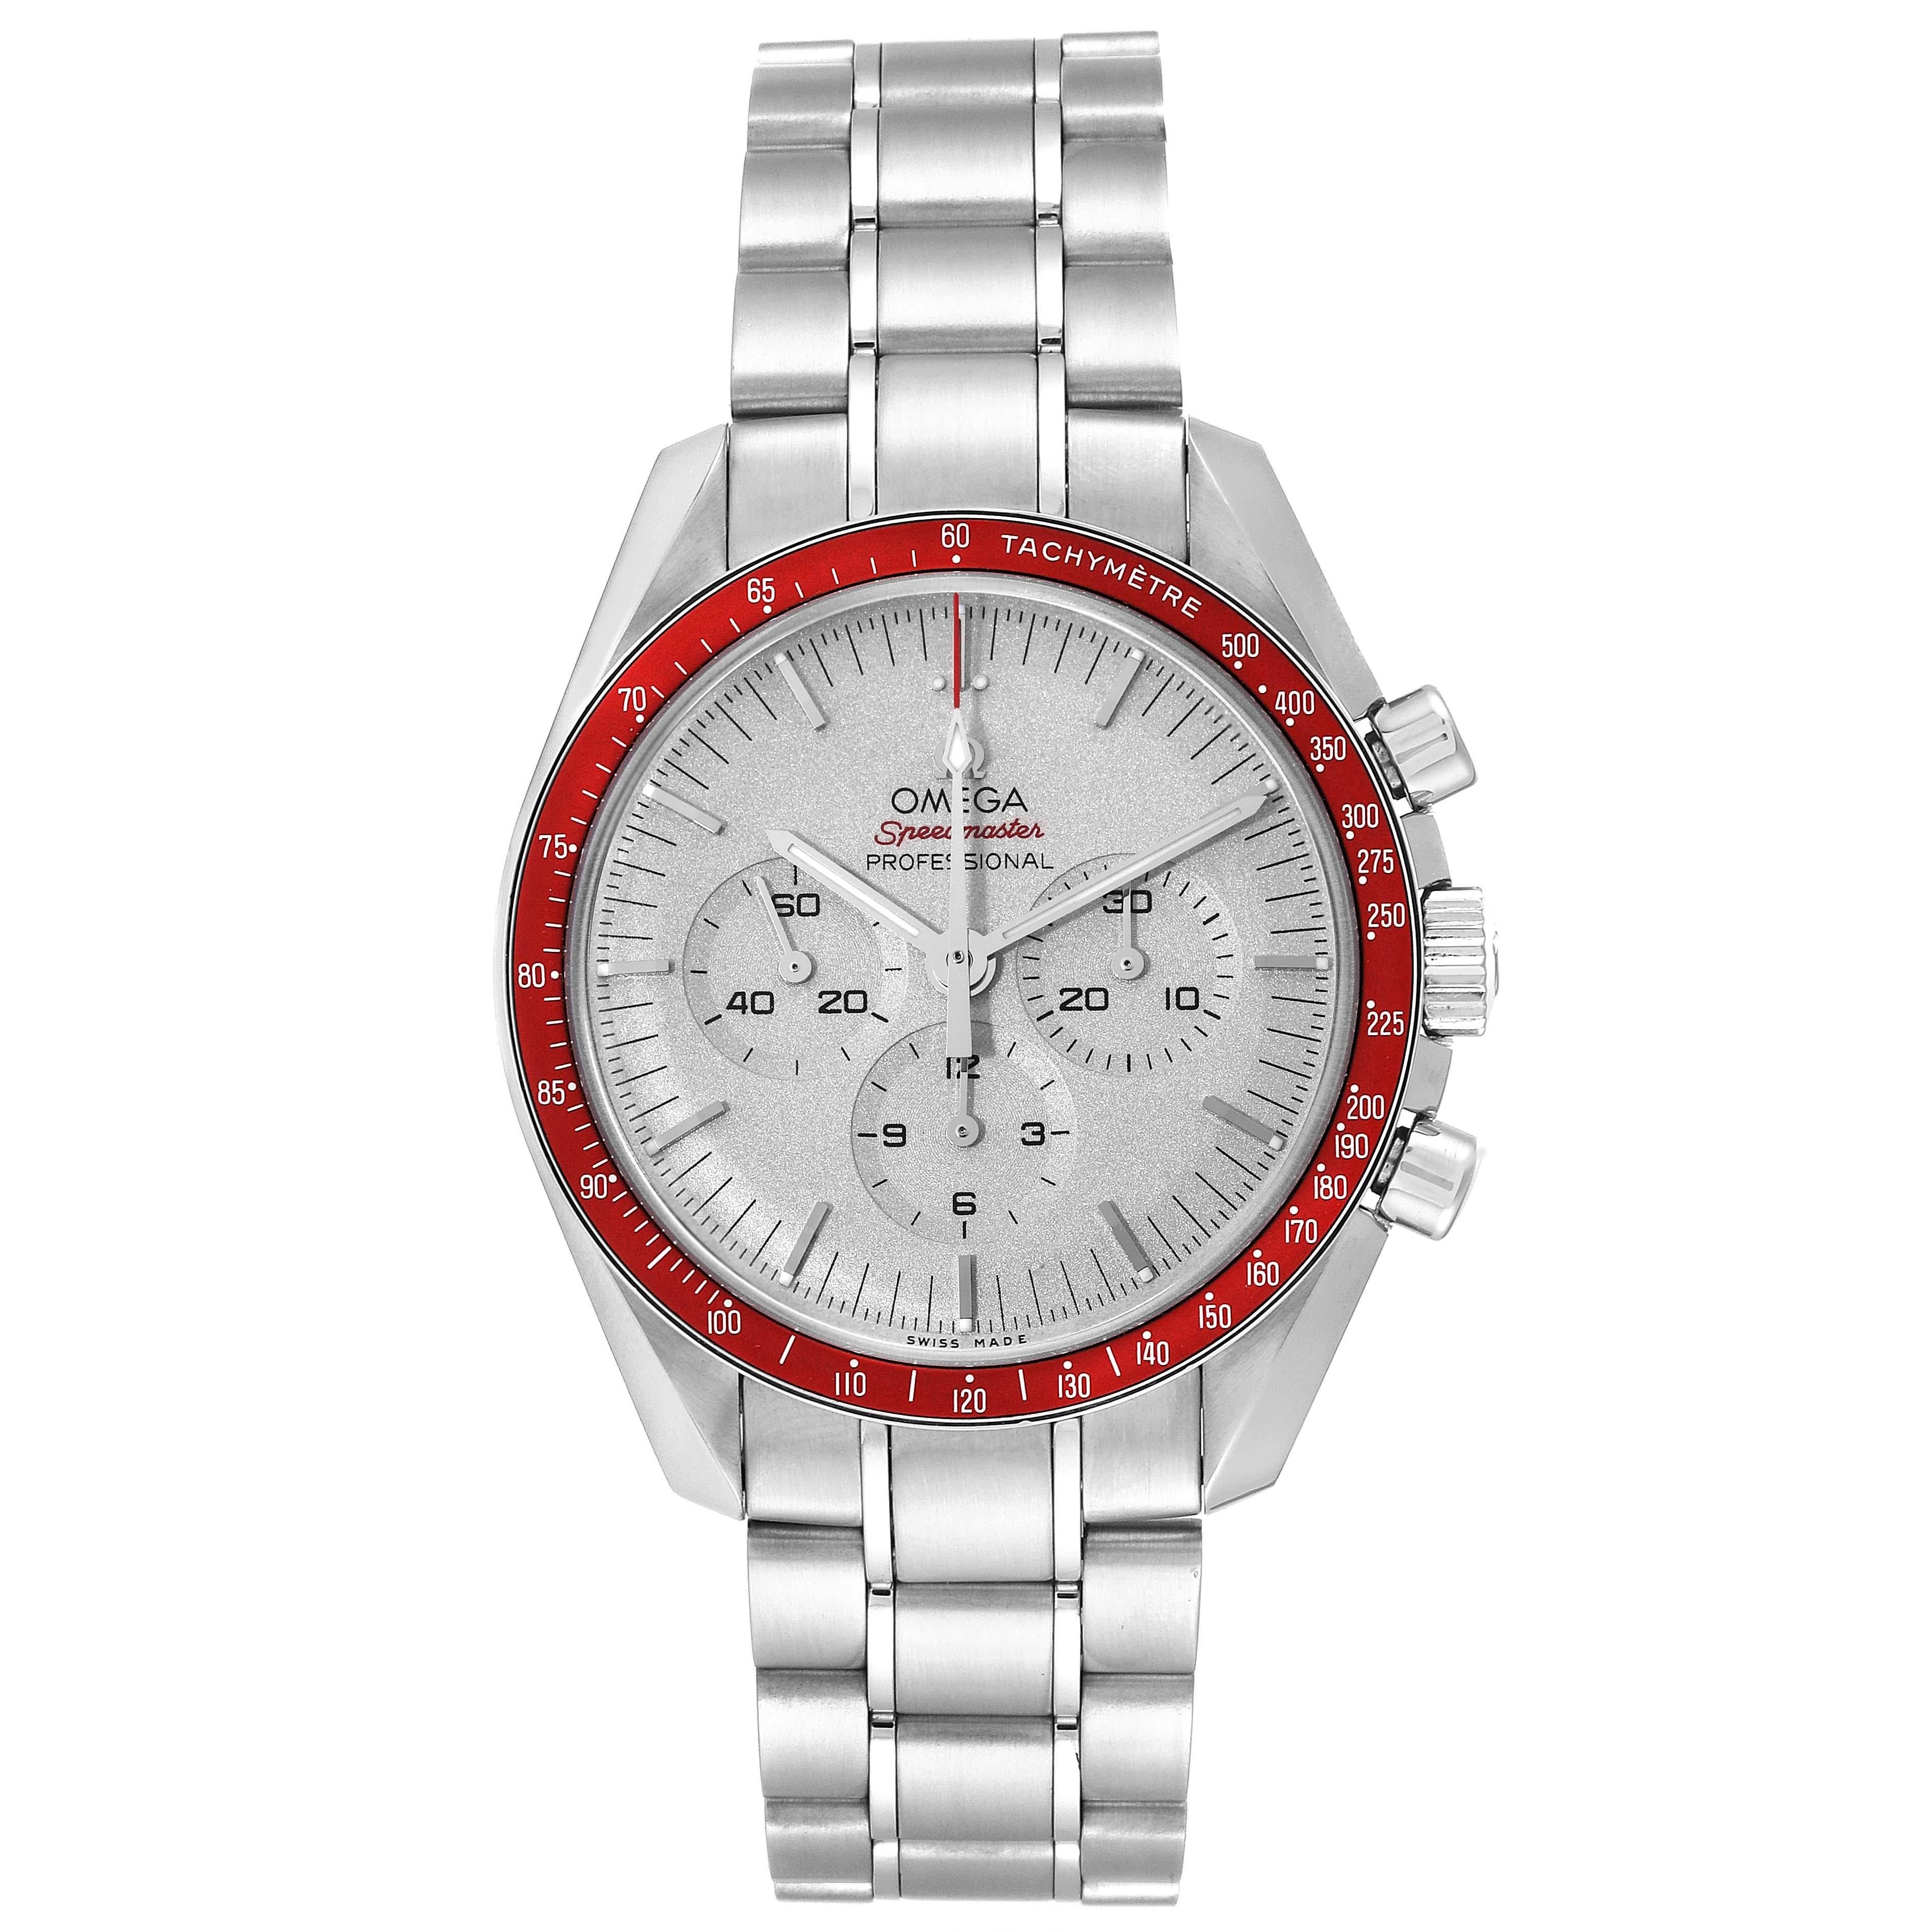 Omega Speedmaster Tokyo 2020 Olympics Limited Edition Steel Mens Watch 522.30.42.30.06.001 Box Card. Manual winding chronograph movement. Stainless steel round case 42.0 mm in diameter. Caseback engraved with Tokyo Olympics 2020 logo. Stainless